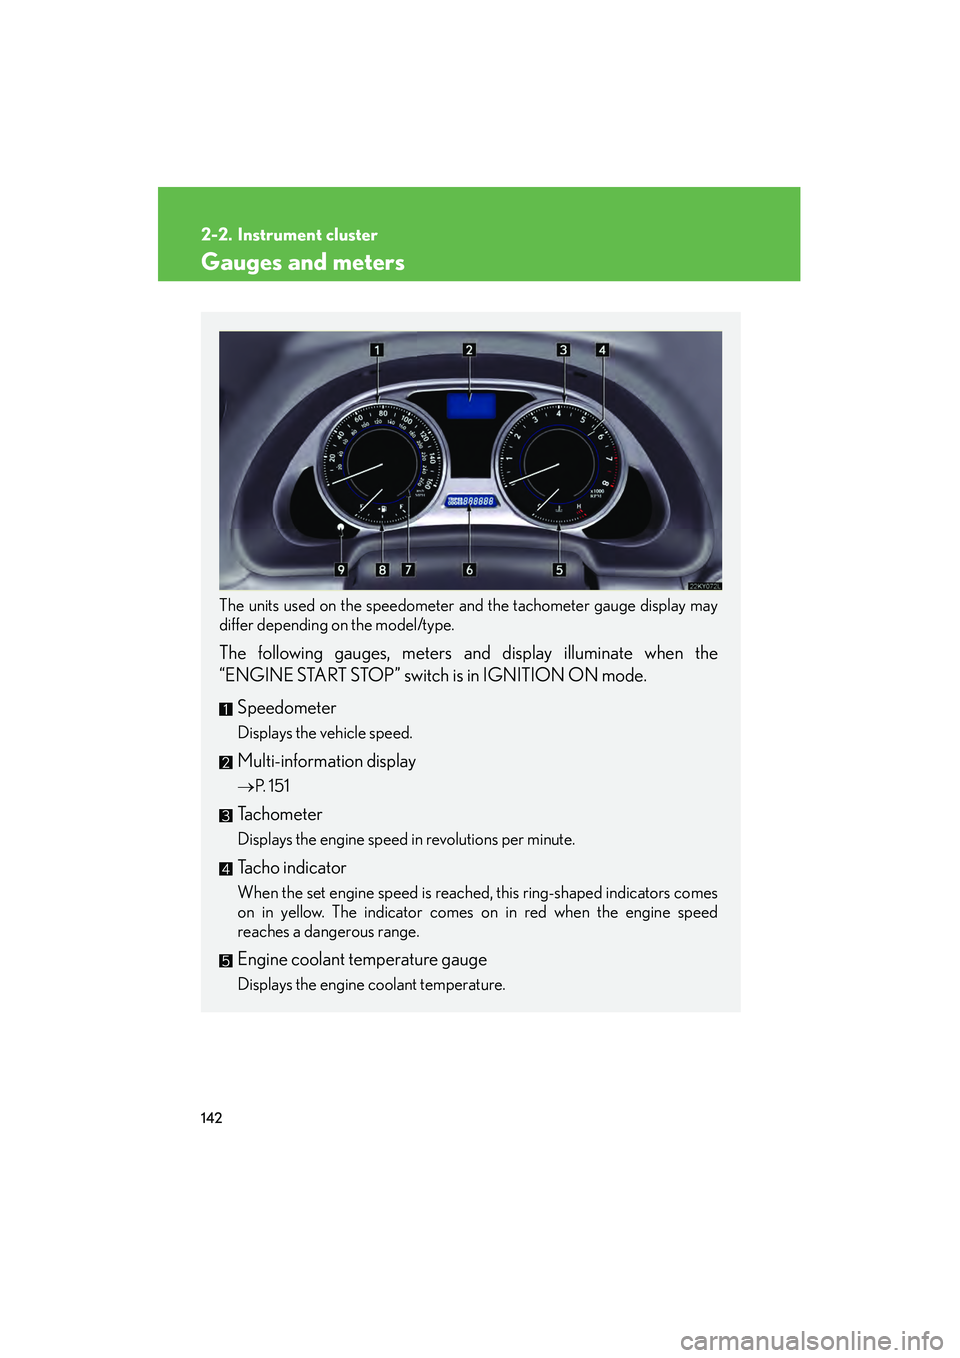 Lexus IS250 2009  Owners Manual 142
08_IS350/250_U_(L/O_0808)
2-2. Instrument cluster
Gauges and meters
The units used on the speedometer and the tachometer gauge display may
differ depending on the model/type.
 
The following gauge